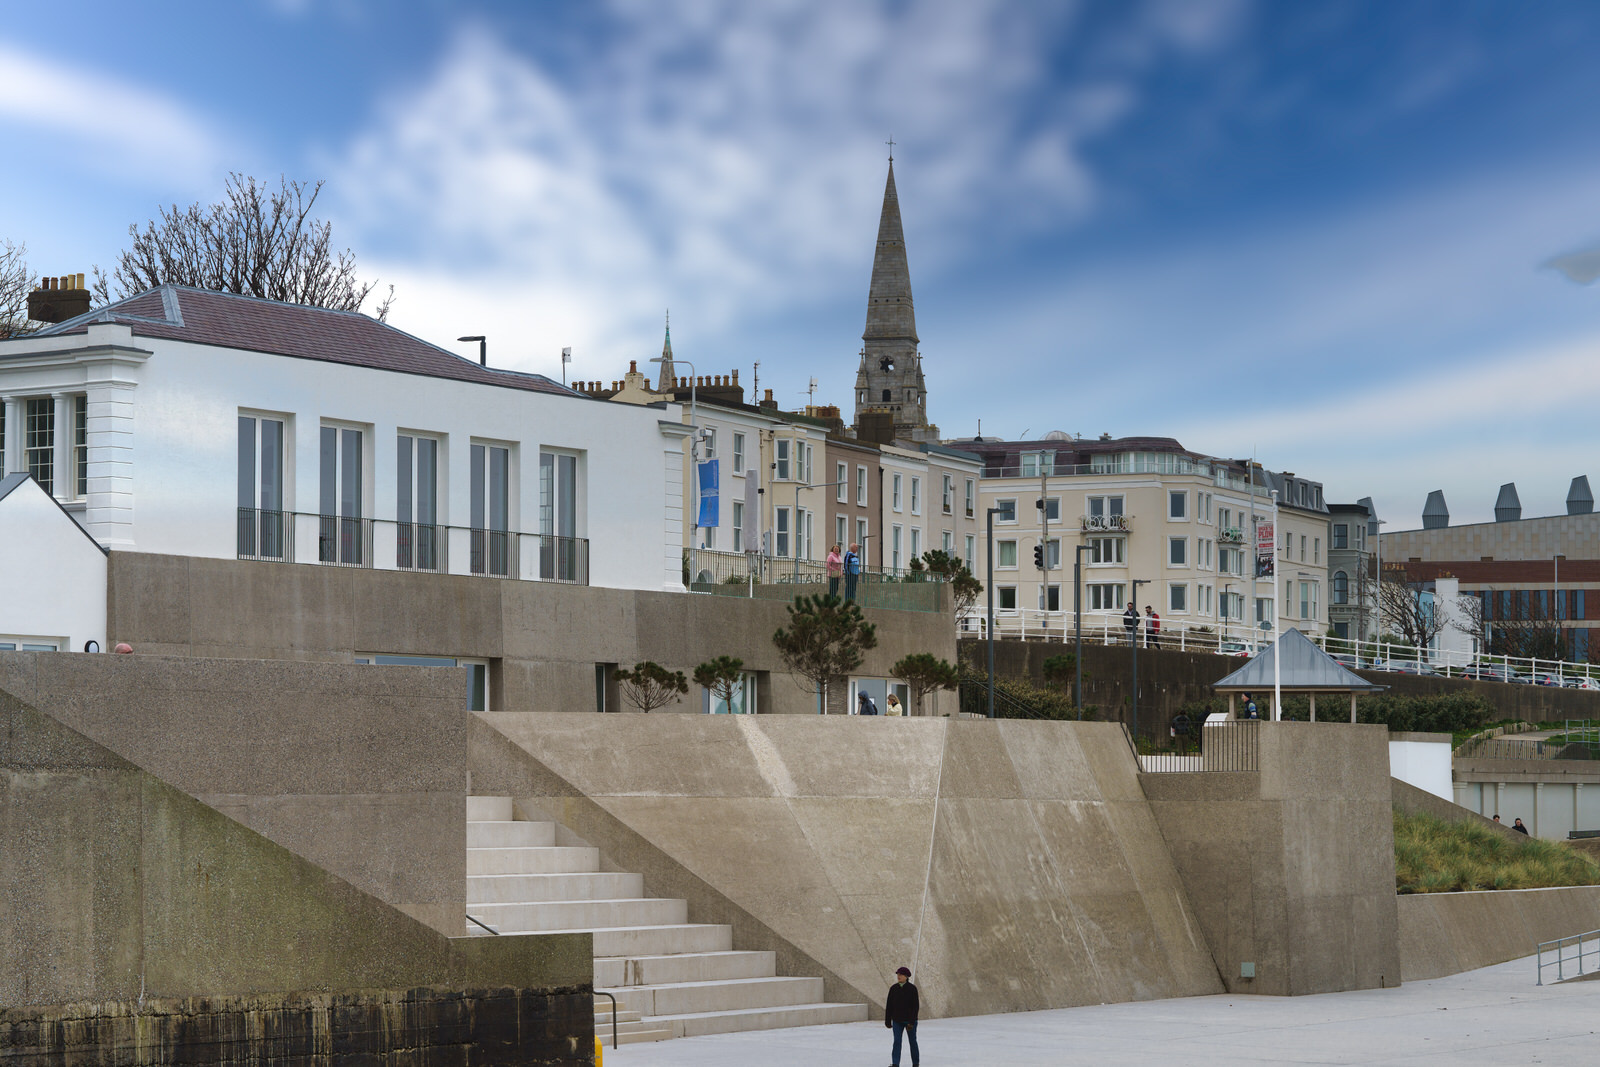 THE PUBLIC BATHS PROJECT IN DUN LAOGHAIRE BUT WITHOUT A SWIMMING POOL